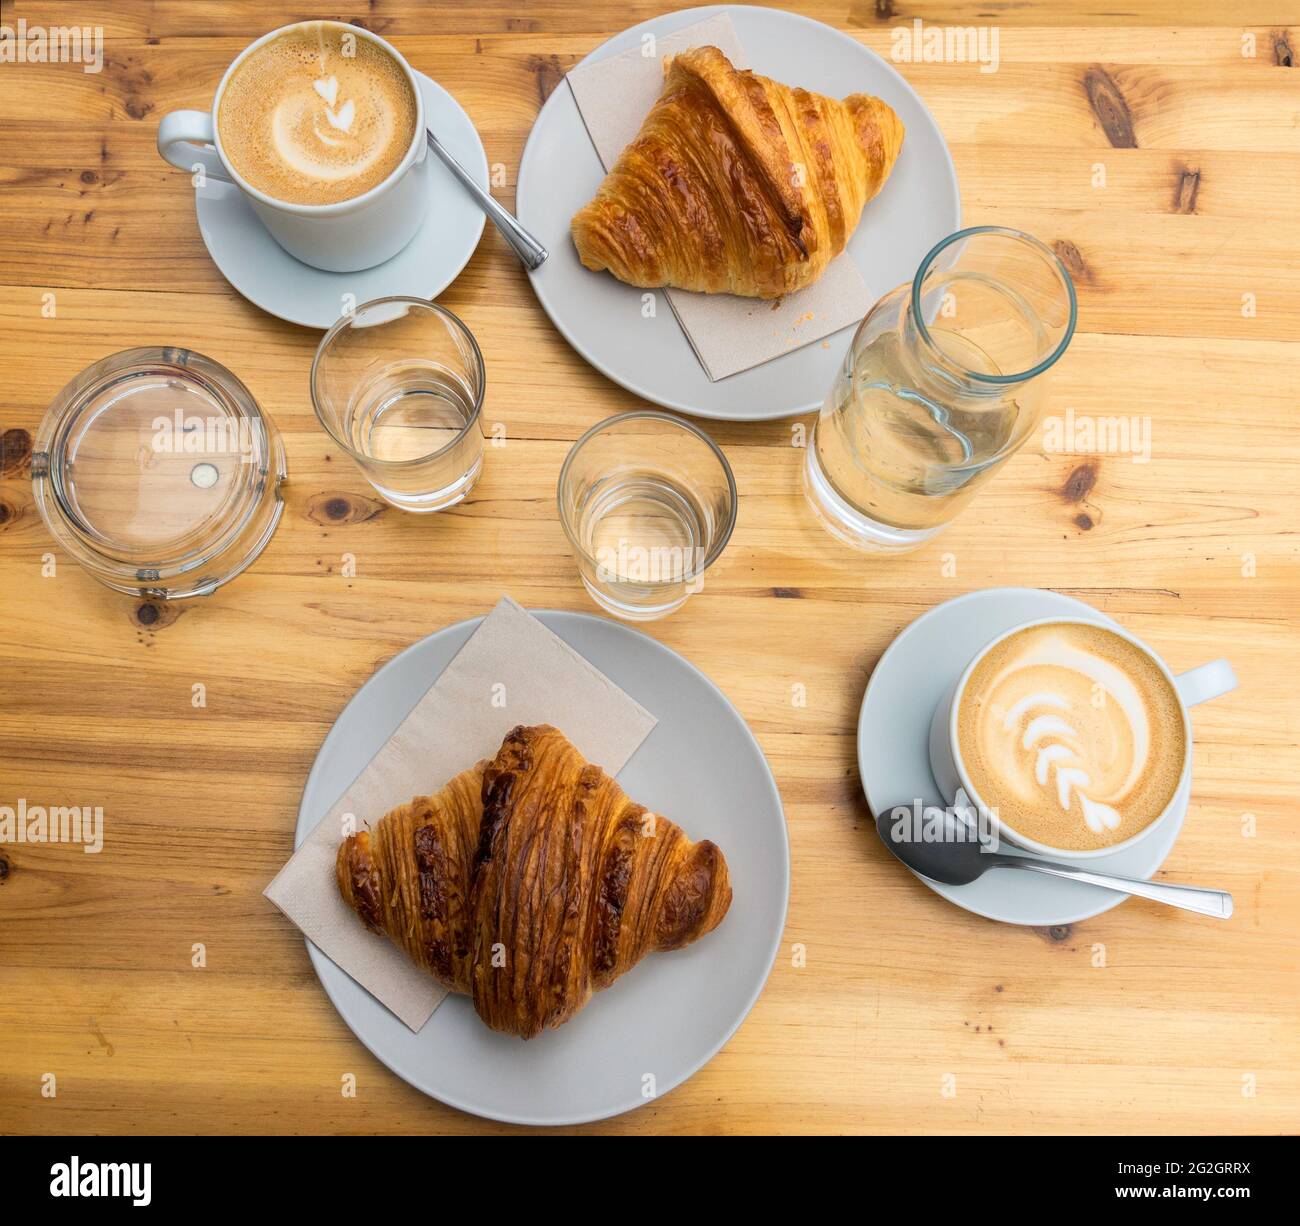 Cups of latte coffee and croissants on wooden table Stock Photo